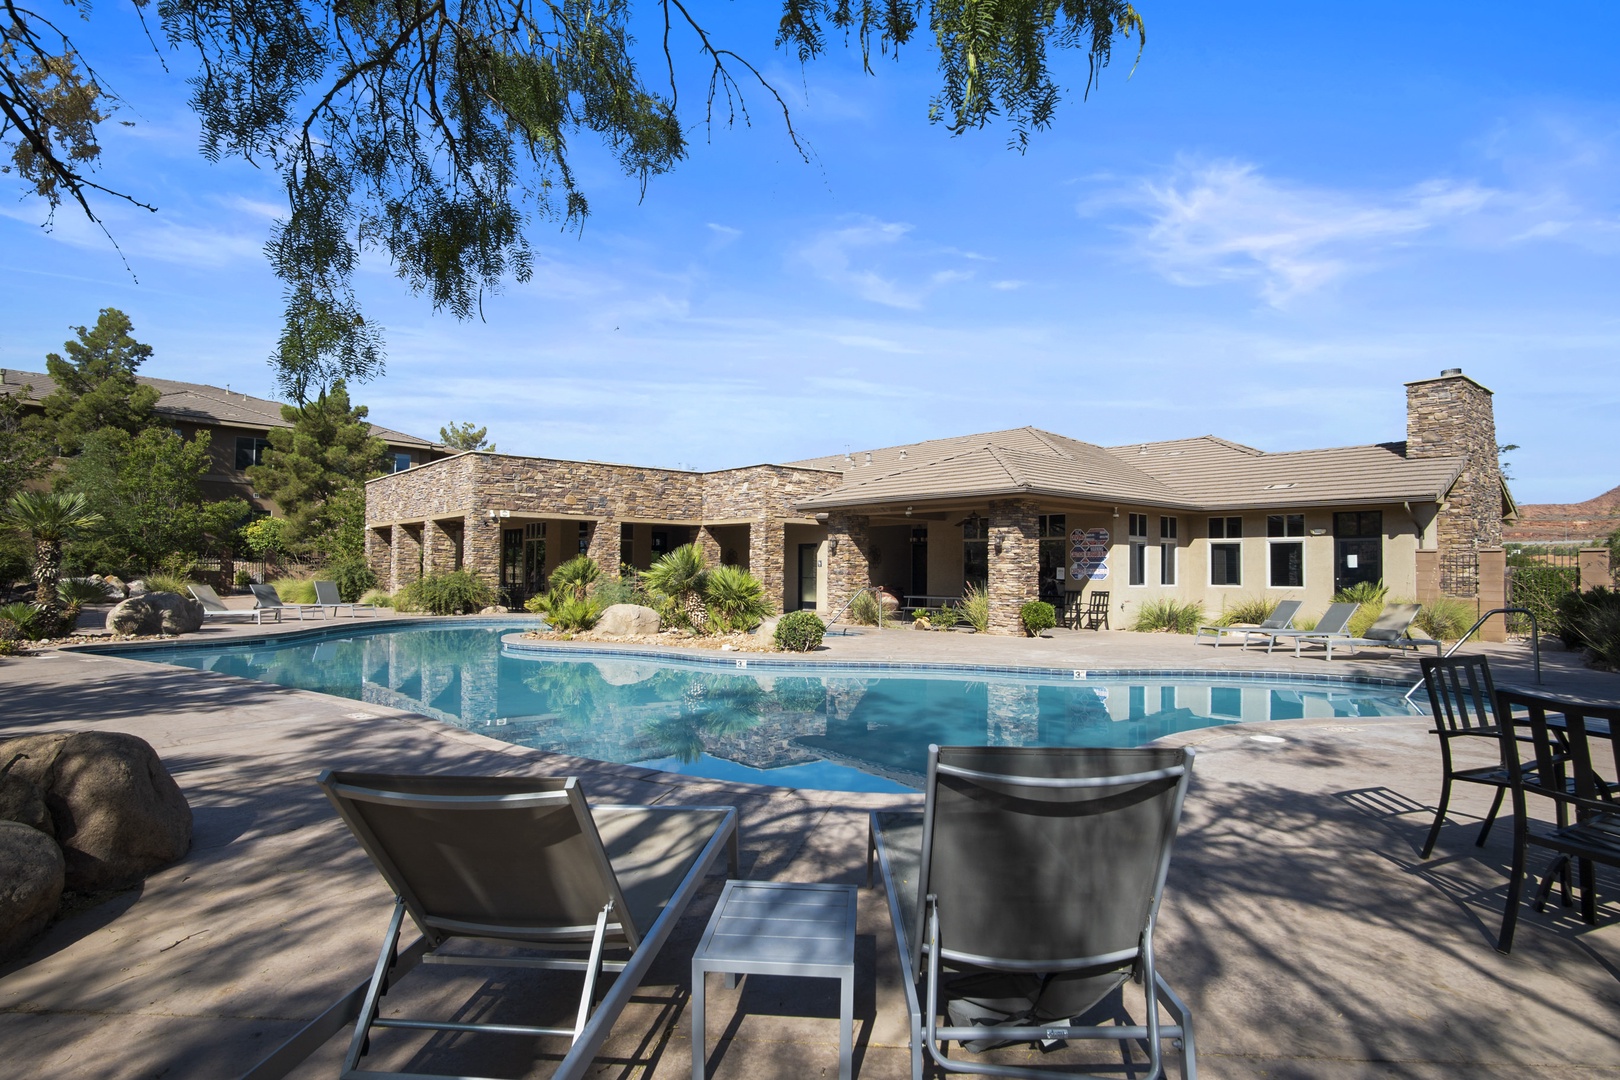 Lounge around the Coral Springs communal pool!